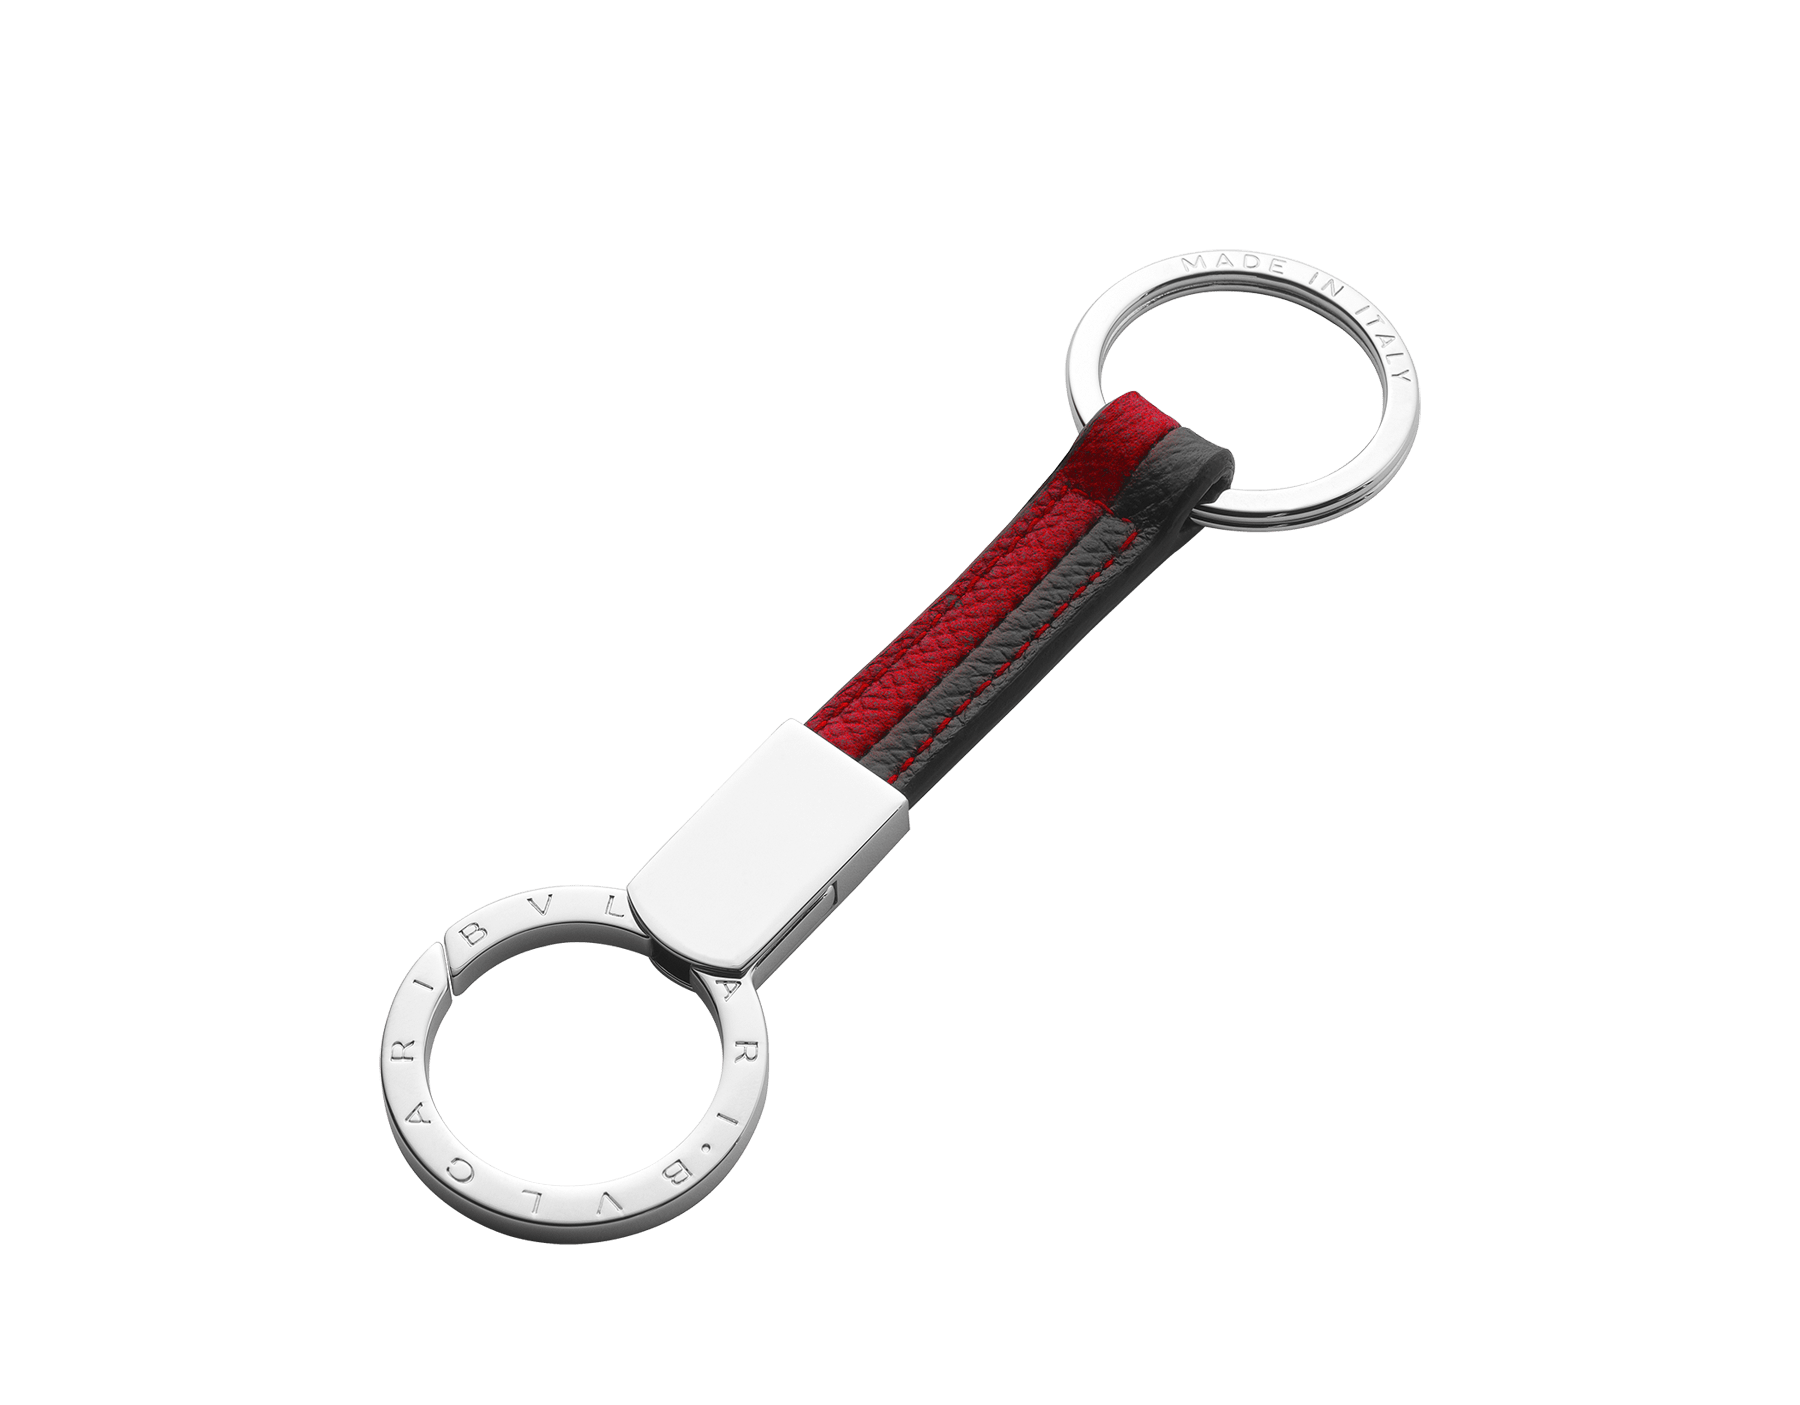 BVLGARI BVLGARI keyholder in grain black and ruby red calf leather. Two keyrings in palladium plated brass featuring the iconic logo décor. 288597 image 1